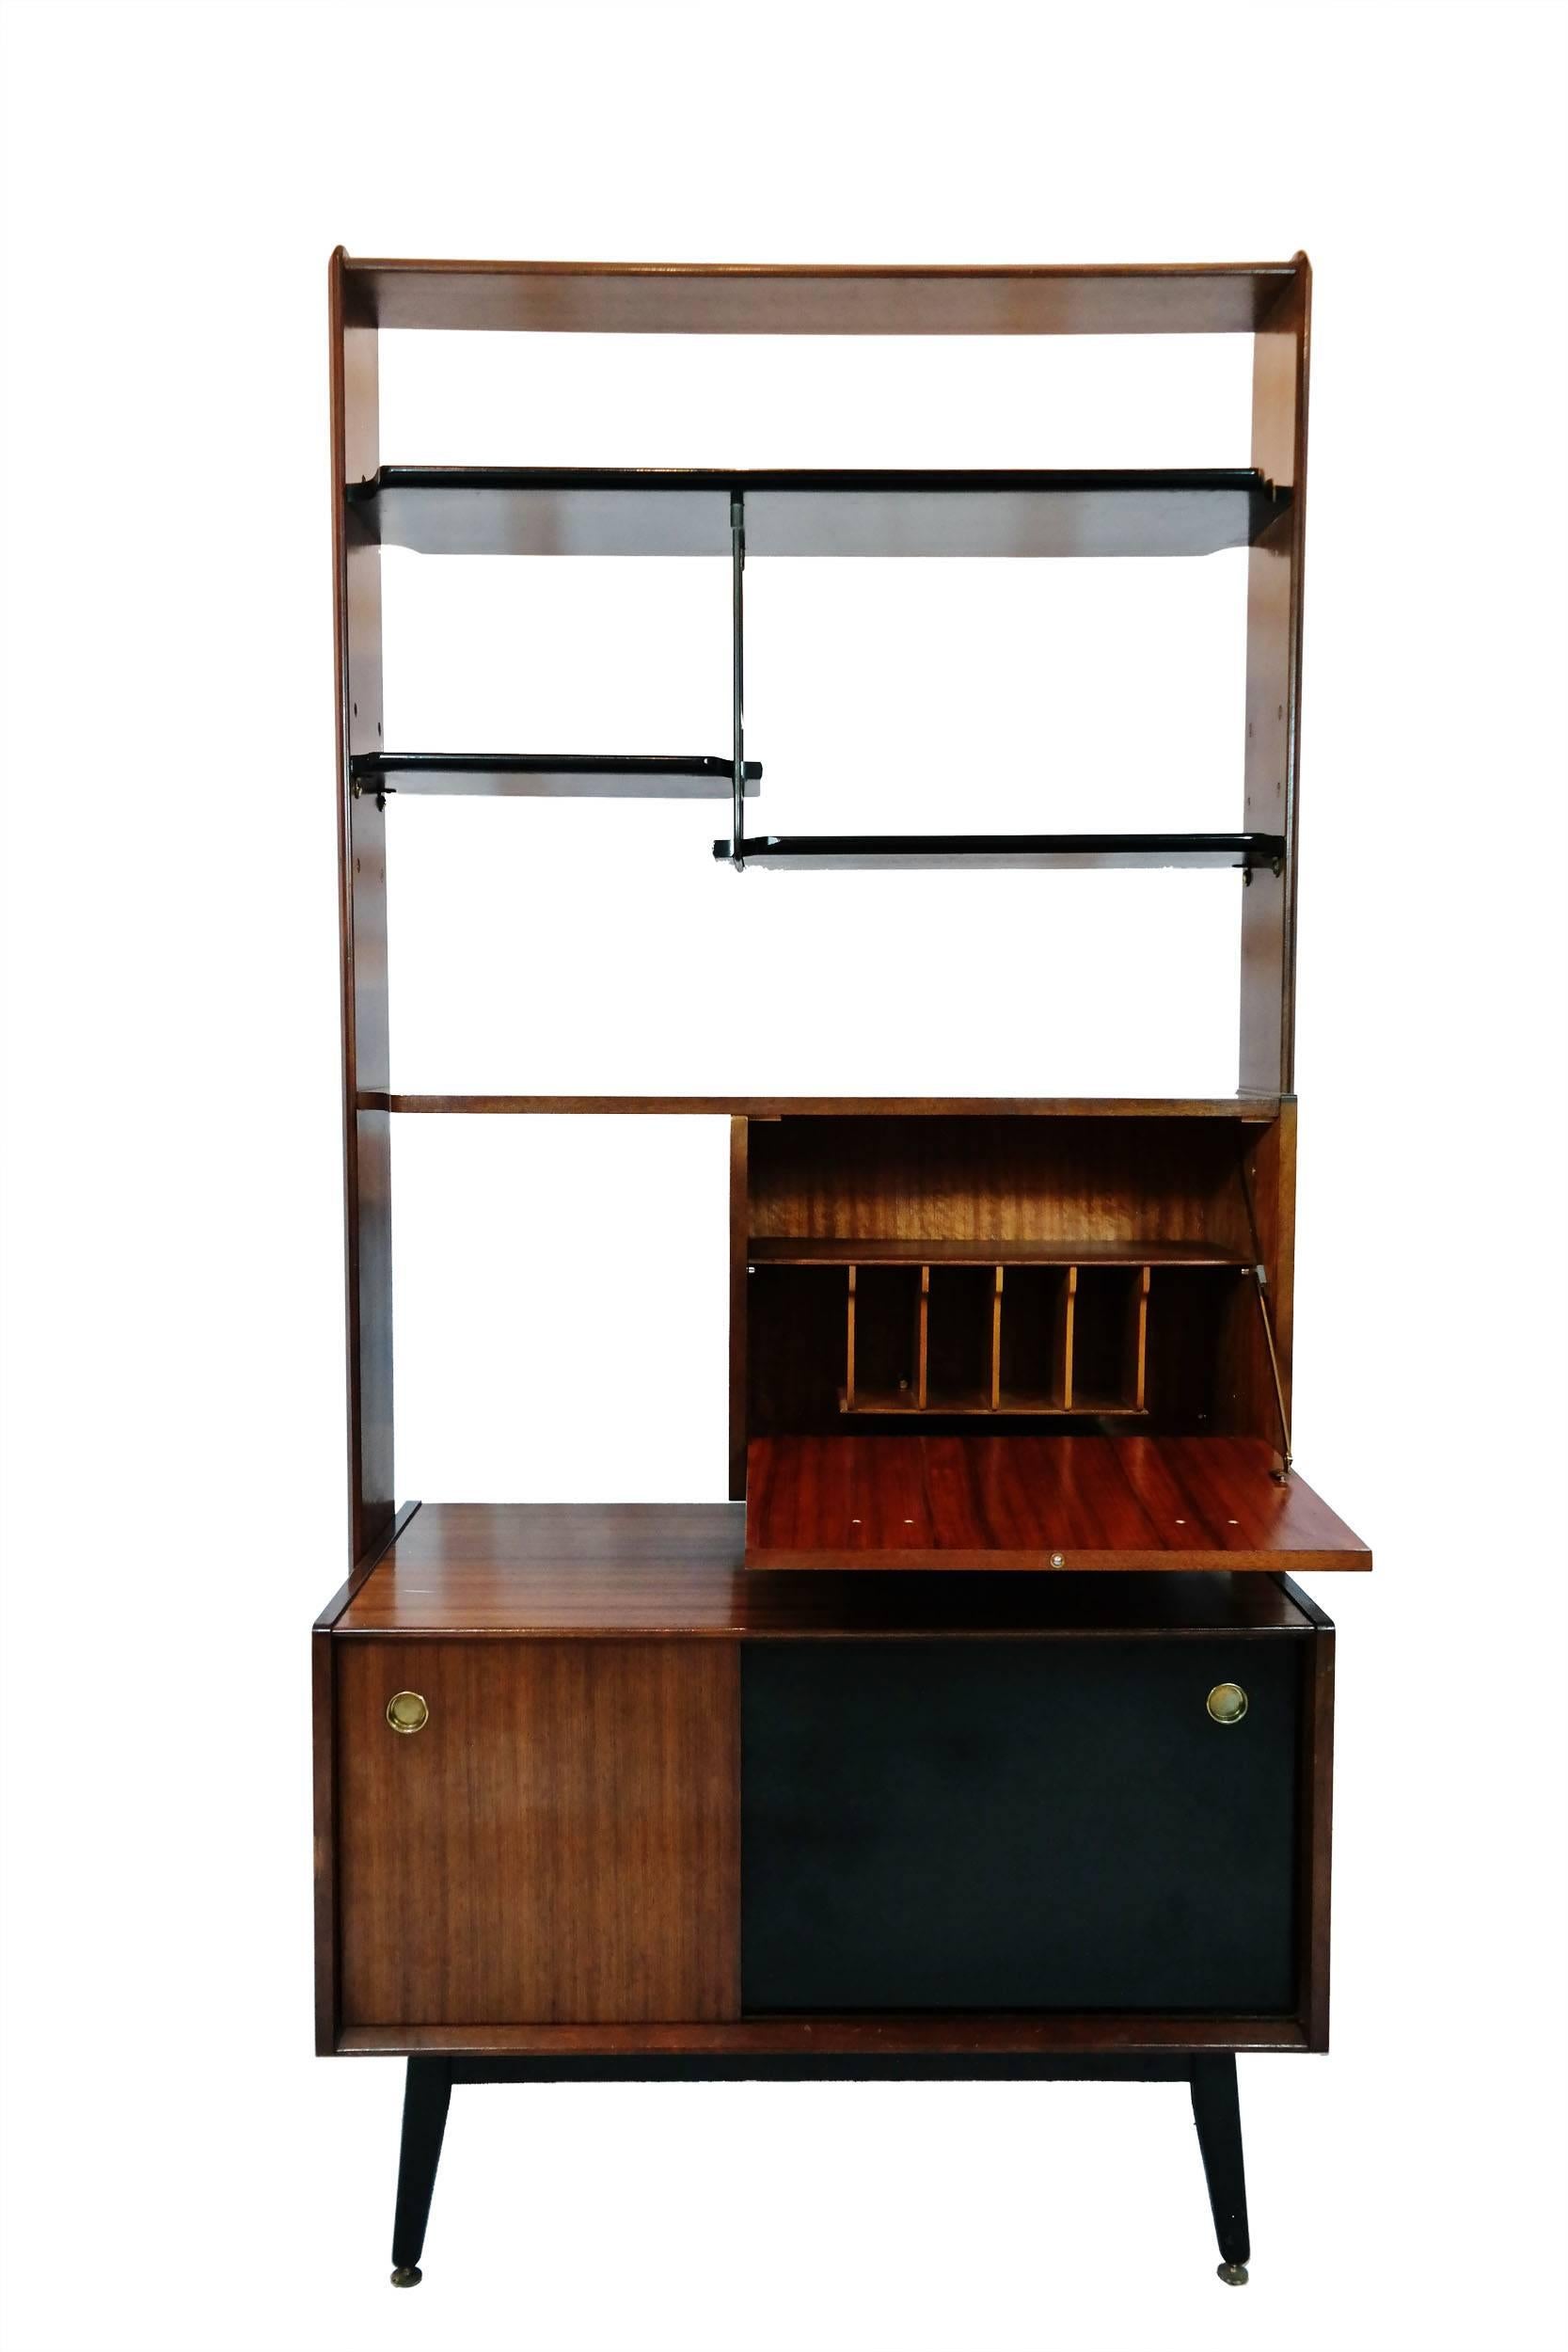 Mid-Century Modern G-plan room Divider shelving unit with fall front secretaire by
Stamped G-Plan
Designed by Ib Kofod-Larsen for G-Plan.